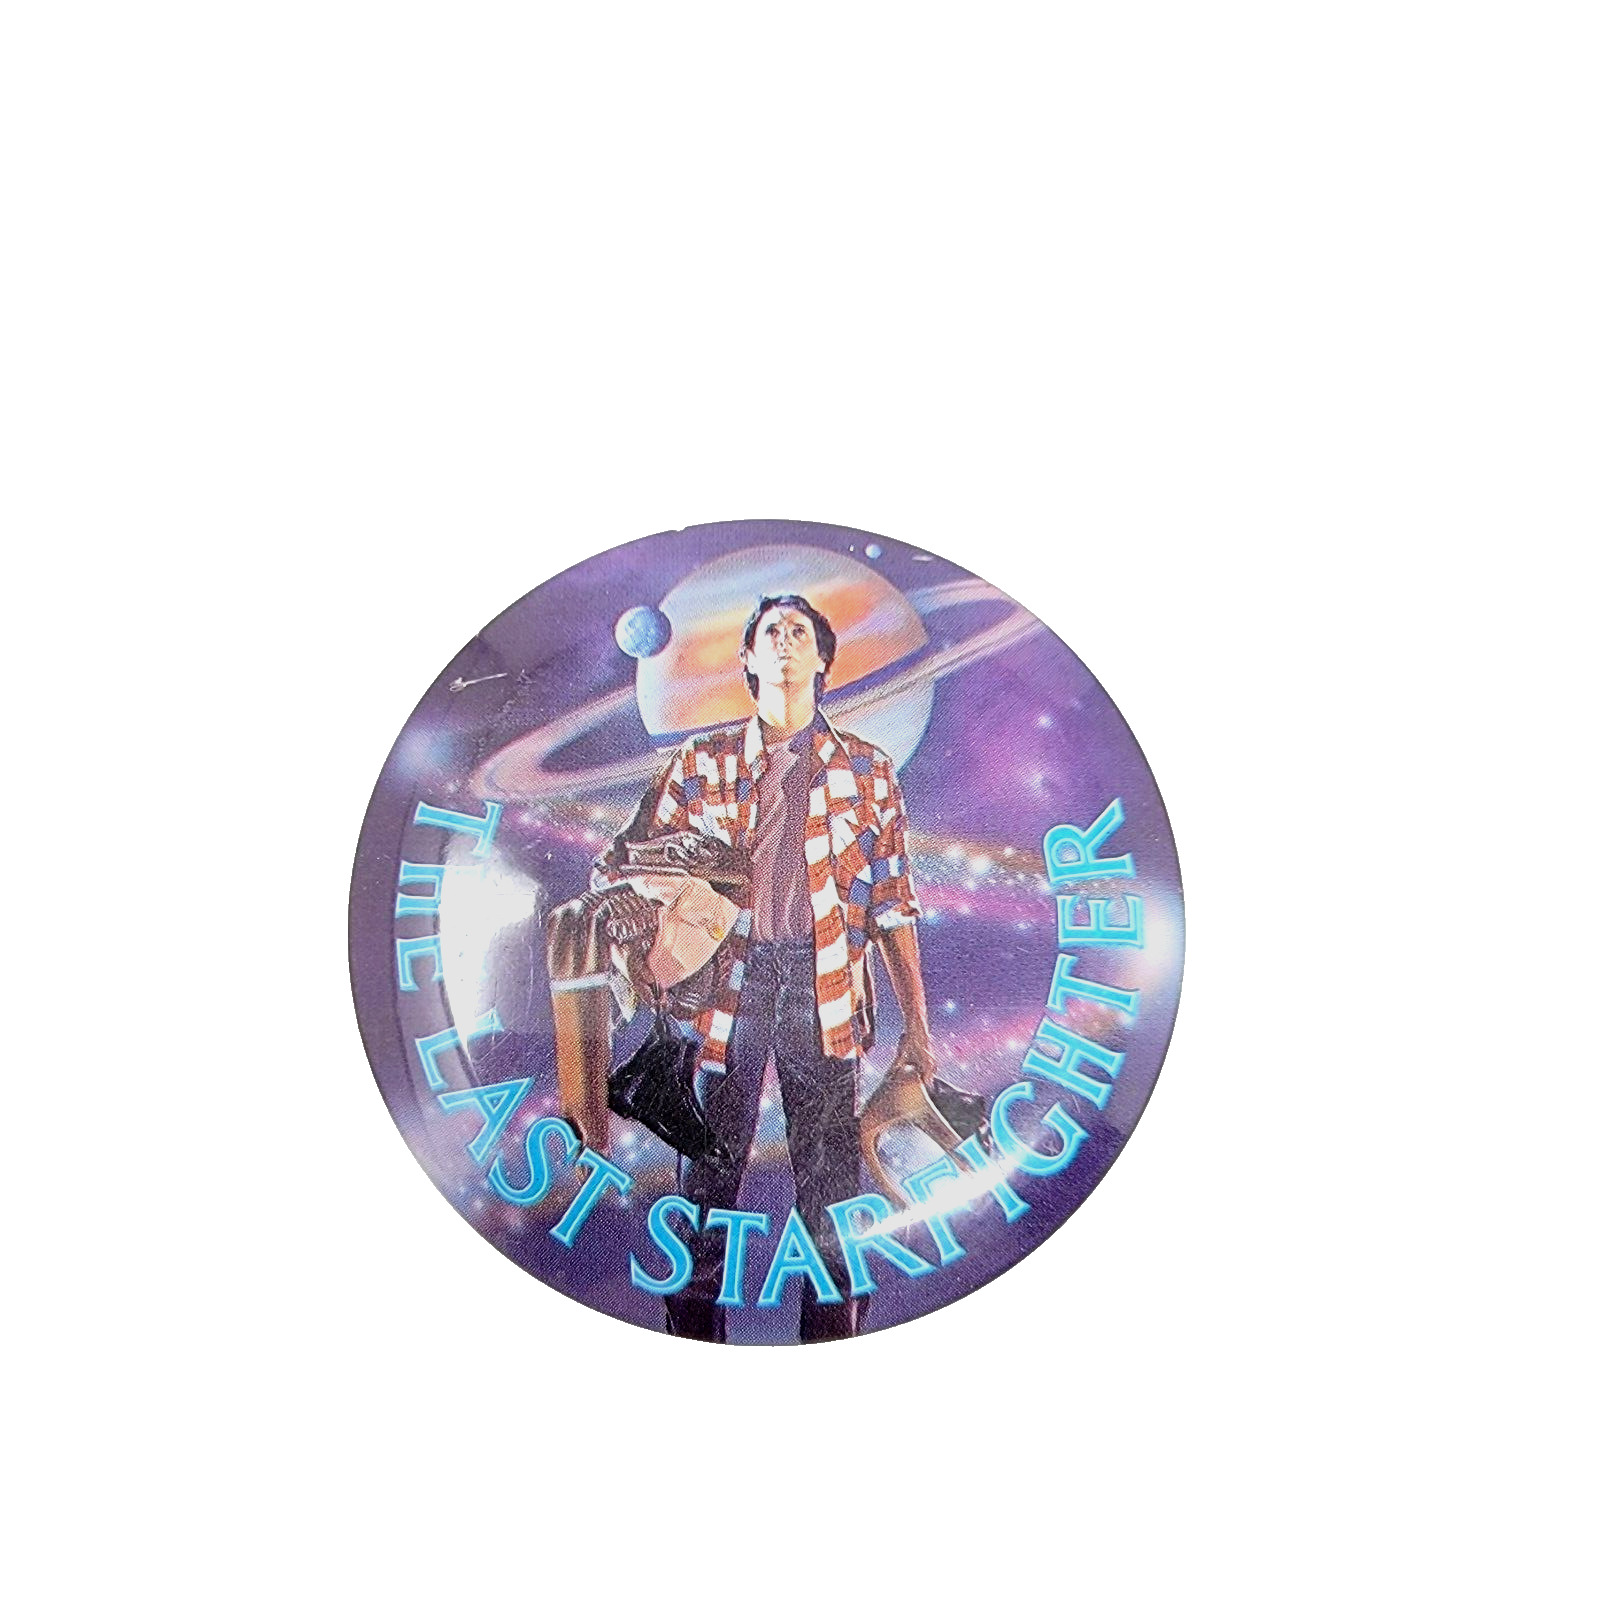 The Last Starfighter Vintage 1980\'s Sci Fi Promo Collectible Pinback Button 